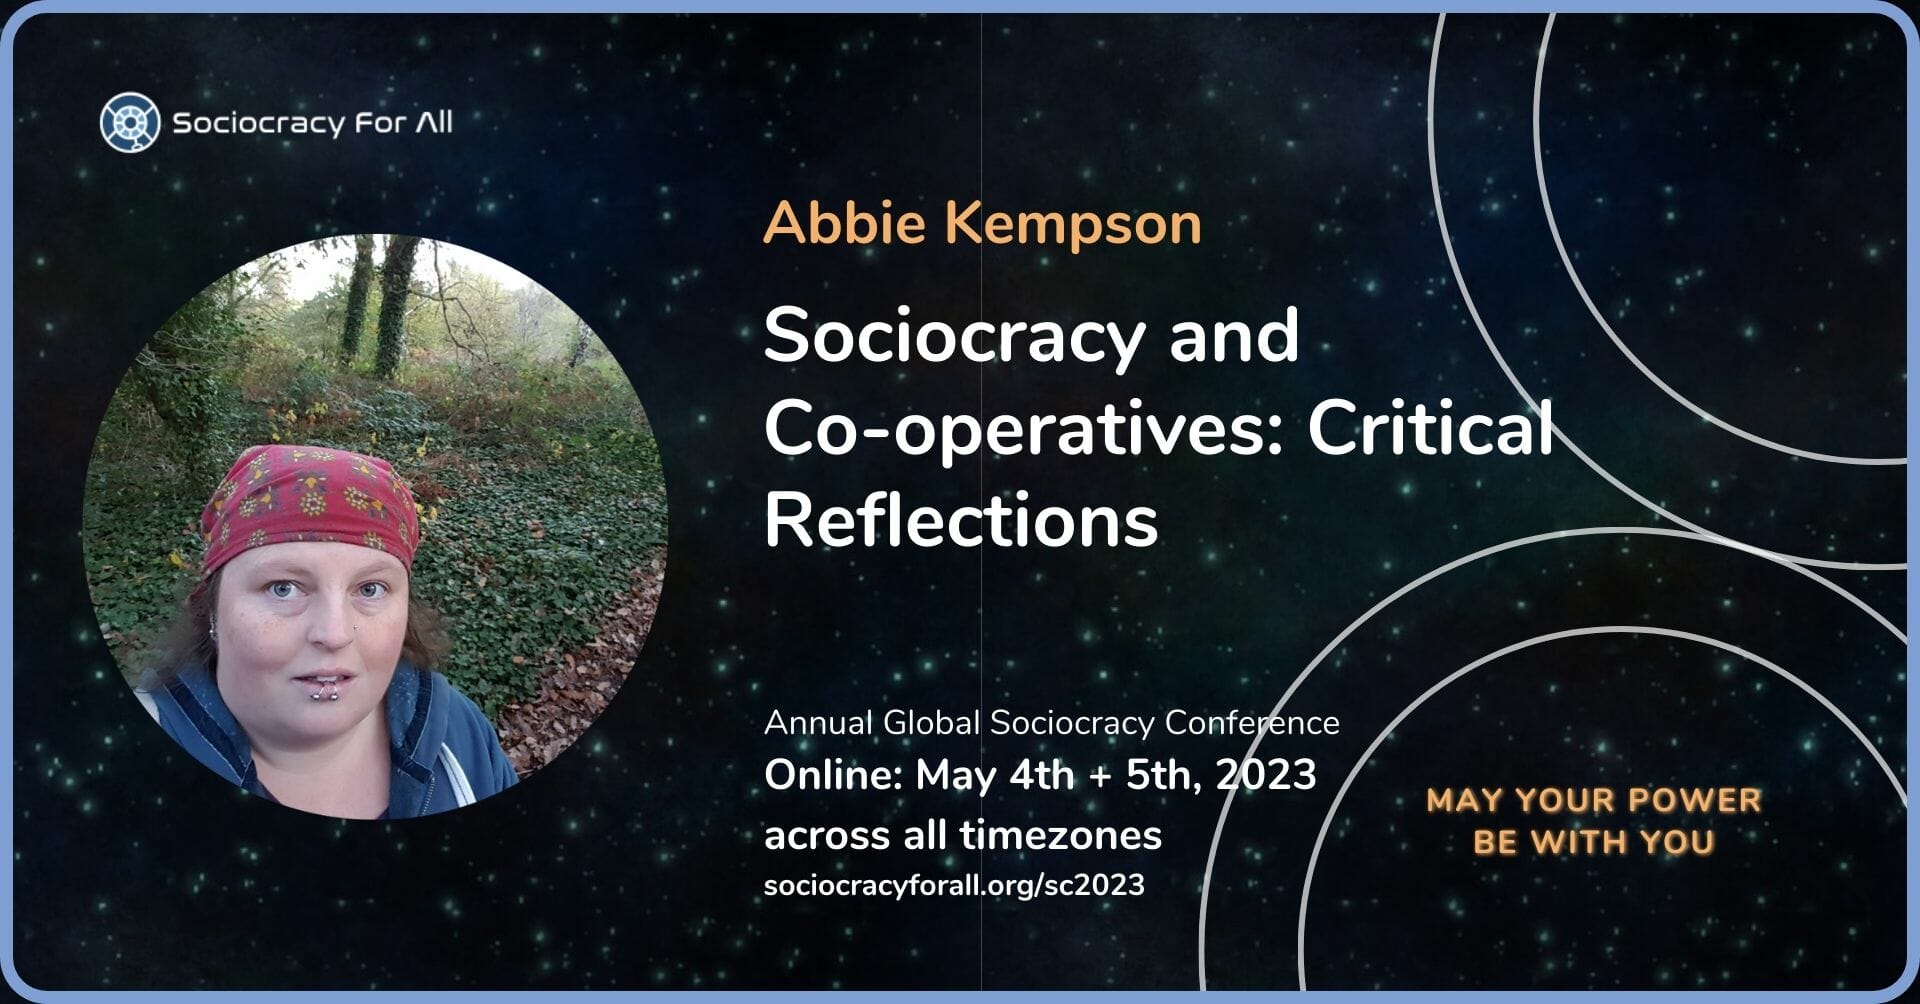 Sociocracy and Co-operatives: Critical Reflections